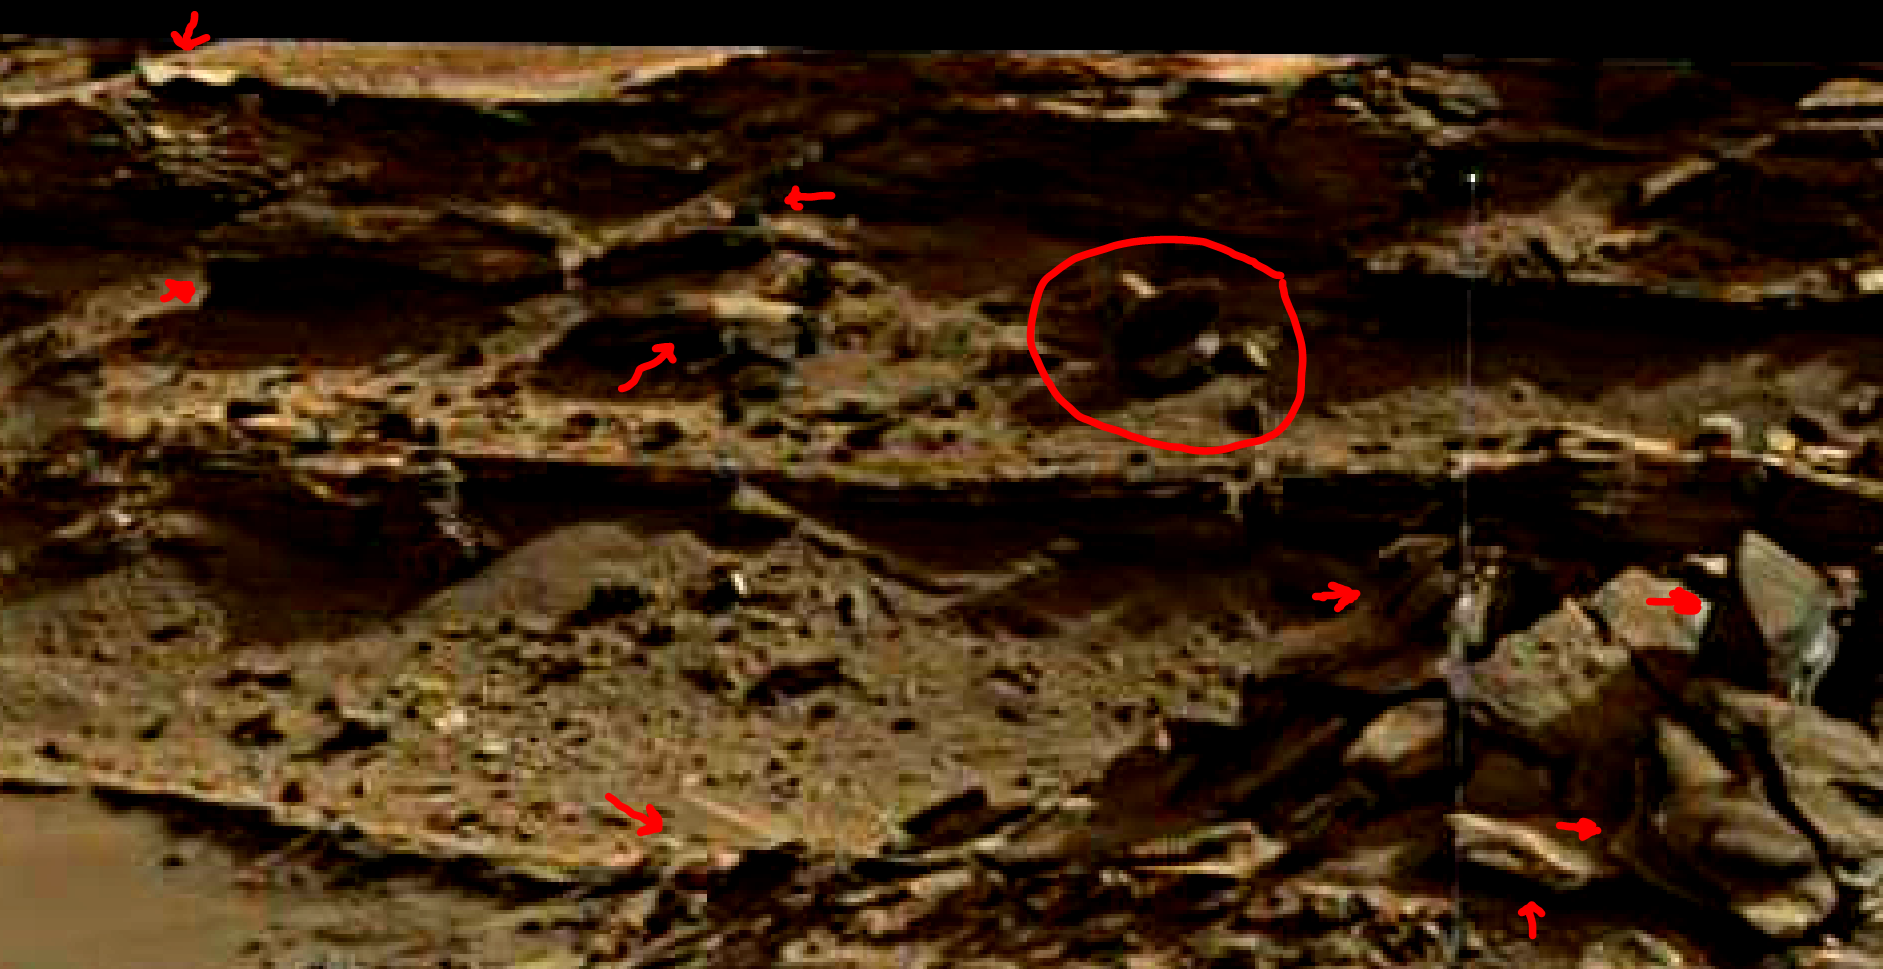 mars sol 1376 anomaly-artifacts 4-1 was life on mars